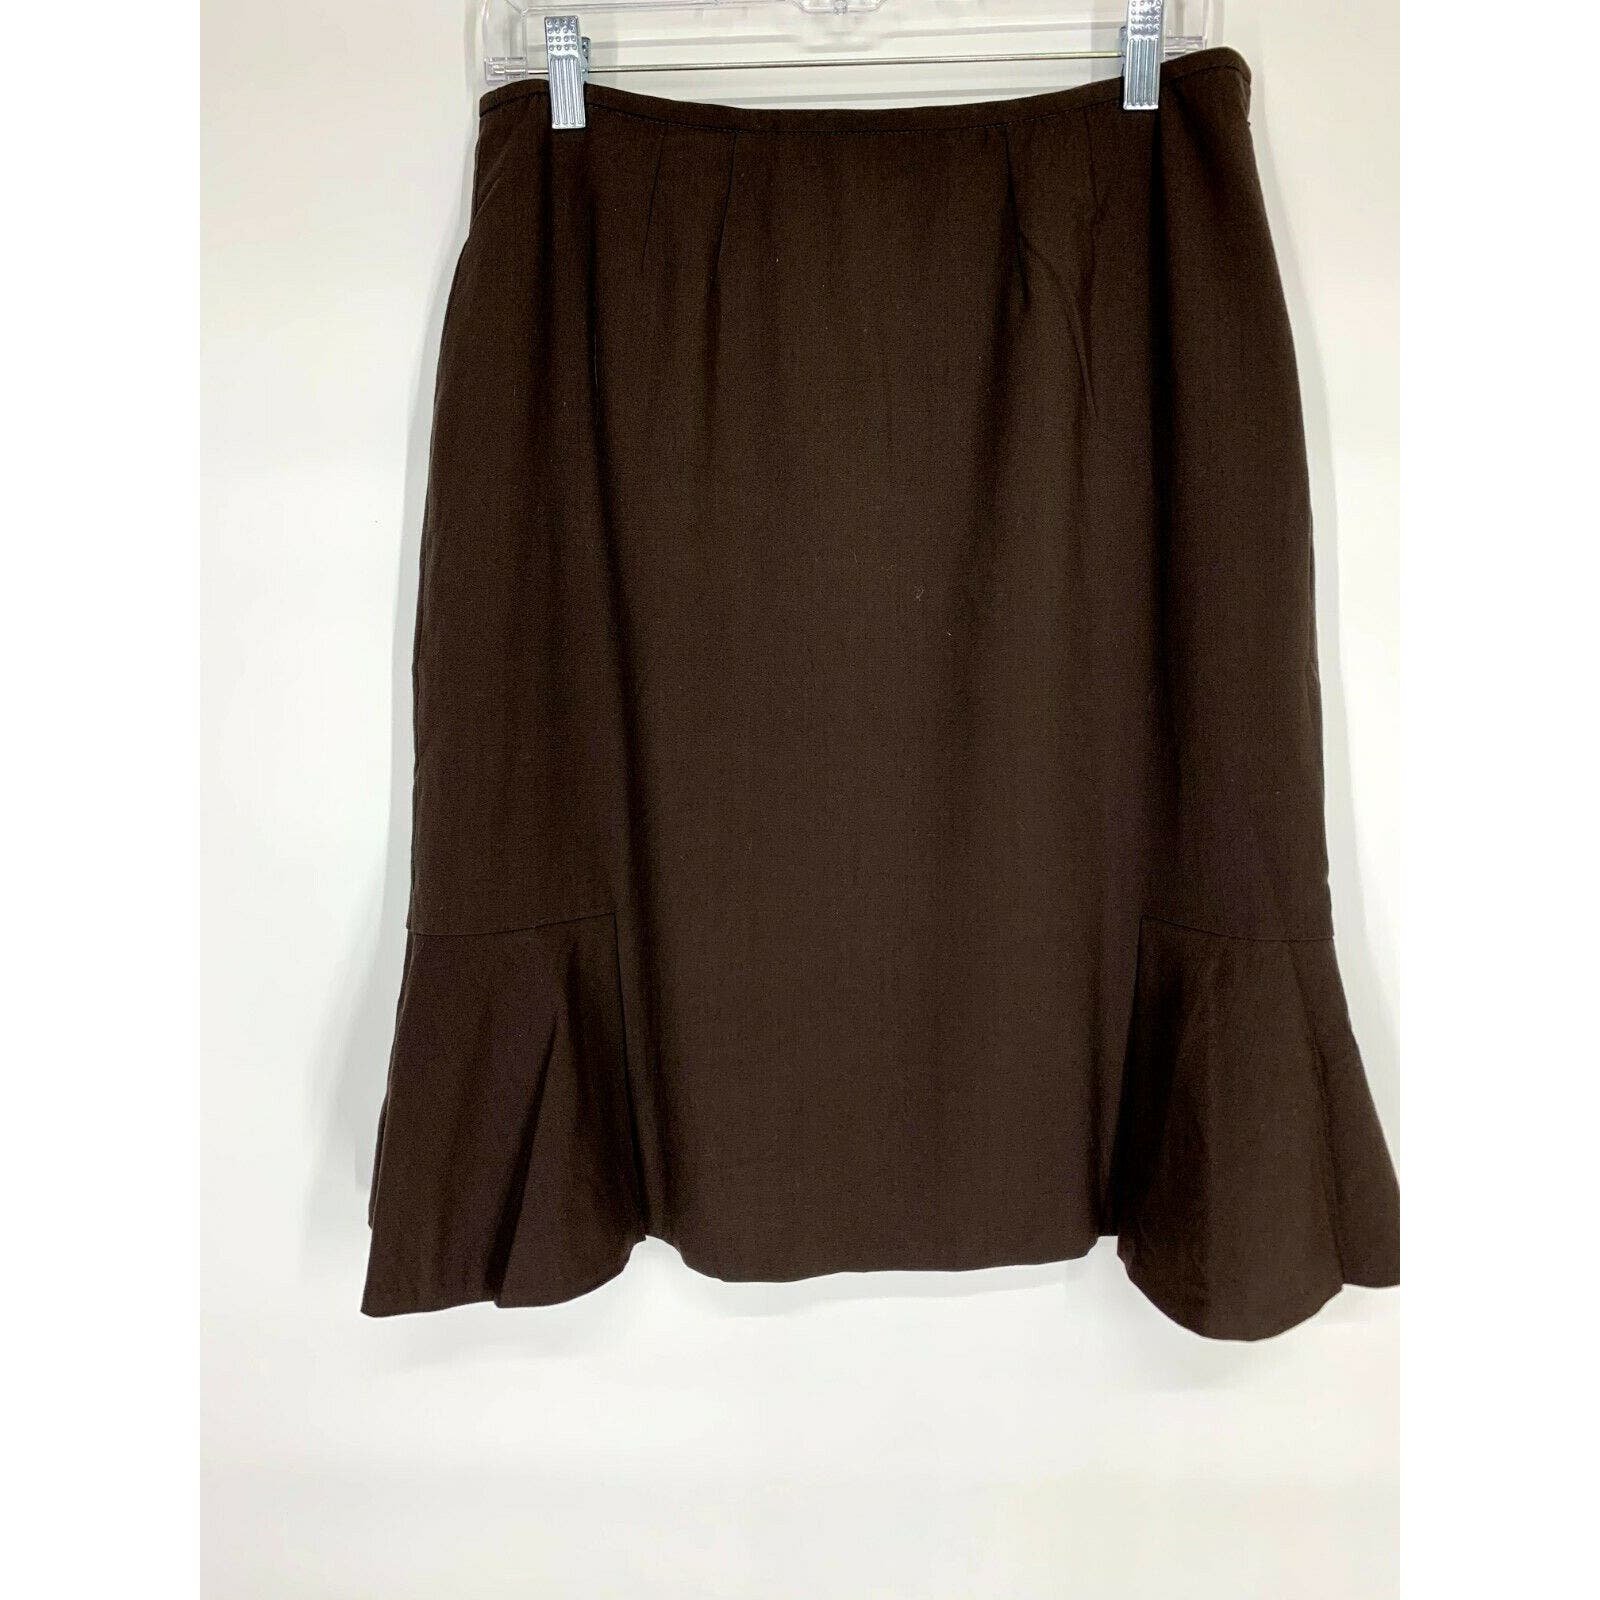 Promotions  Solid Brown A-Line Knee Length Midi Flare Skirt Women’s lSMe0BtOD all for you